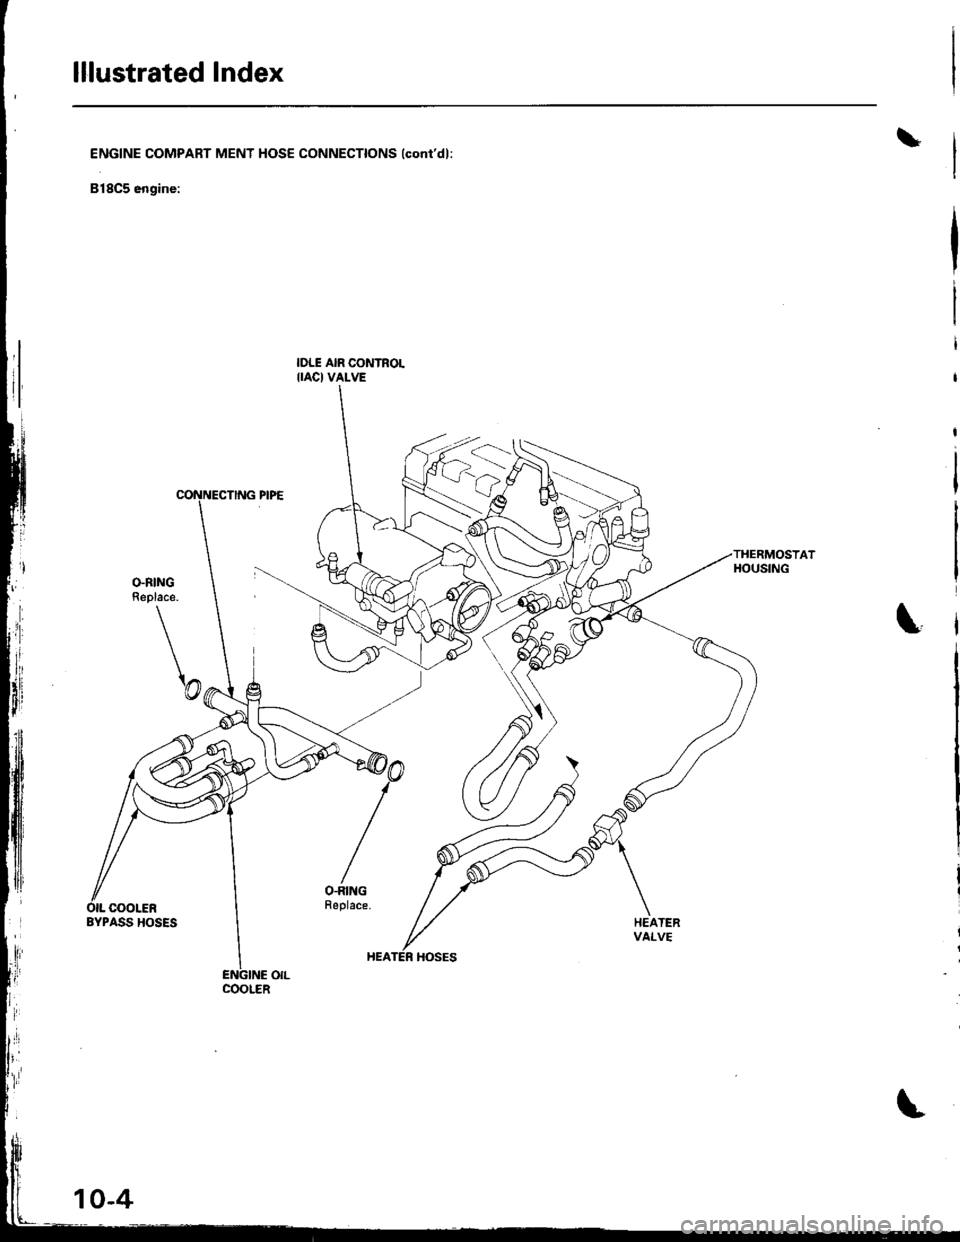 HONDA INTEGRA 1998 4.G Owners Guide lllustrated Index
\ENGINE COMPART MENT HOSE CONNECTIONS lconidl:
818C5 engine:
IDLE AIR CONTROLIIAC} VALVE
THERMOSTATHOUSING
\
\
O.RINGReplace.
\@
/
O-RINGFeplace.OIL COOLERBYPASS HOSESHEATERvAt_vE
C